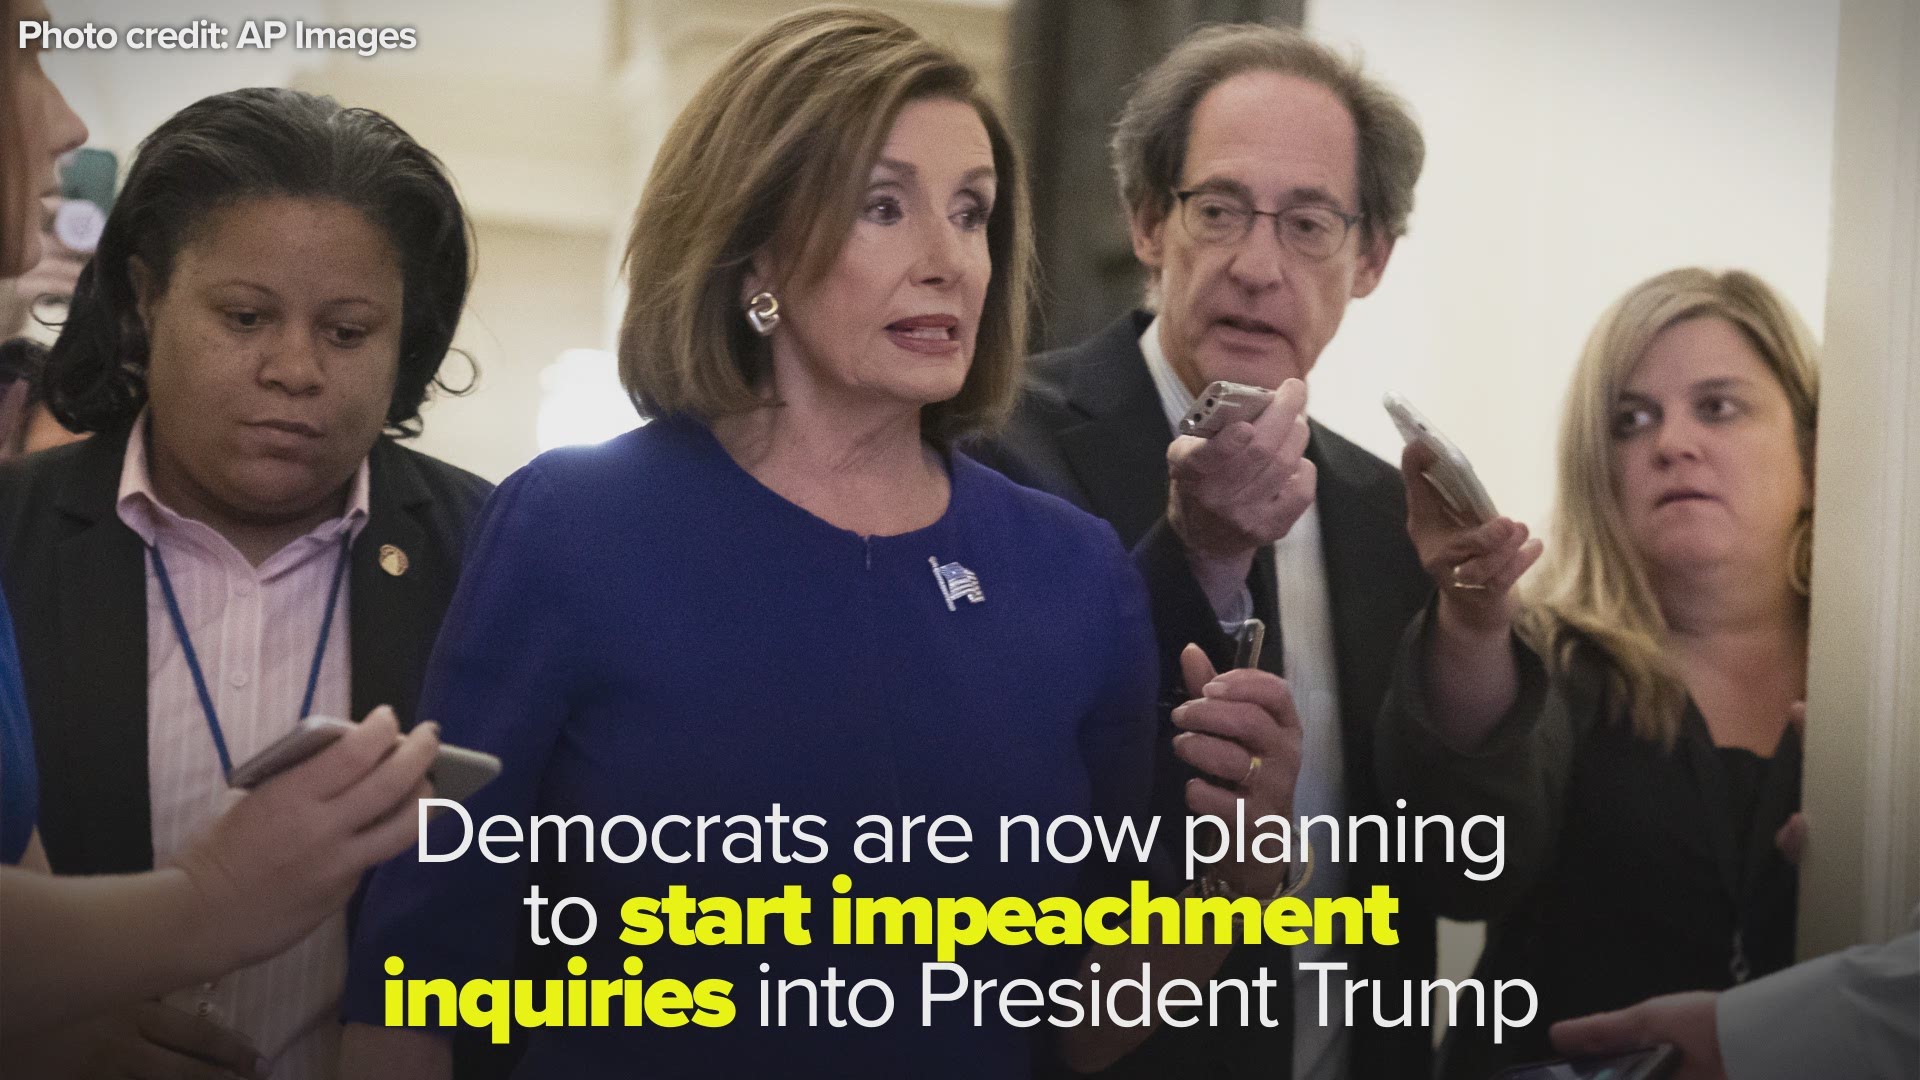 Speaker Nancy Pelosi has announced the House is moving forward with an official impeachment inquiry of President Donald Trump.